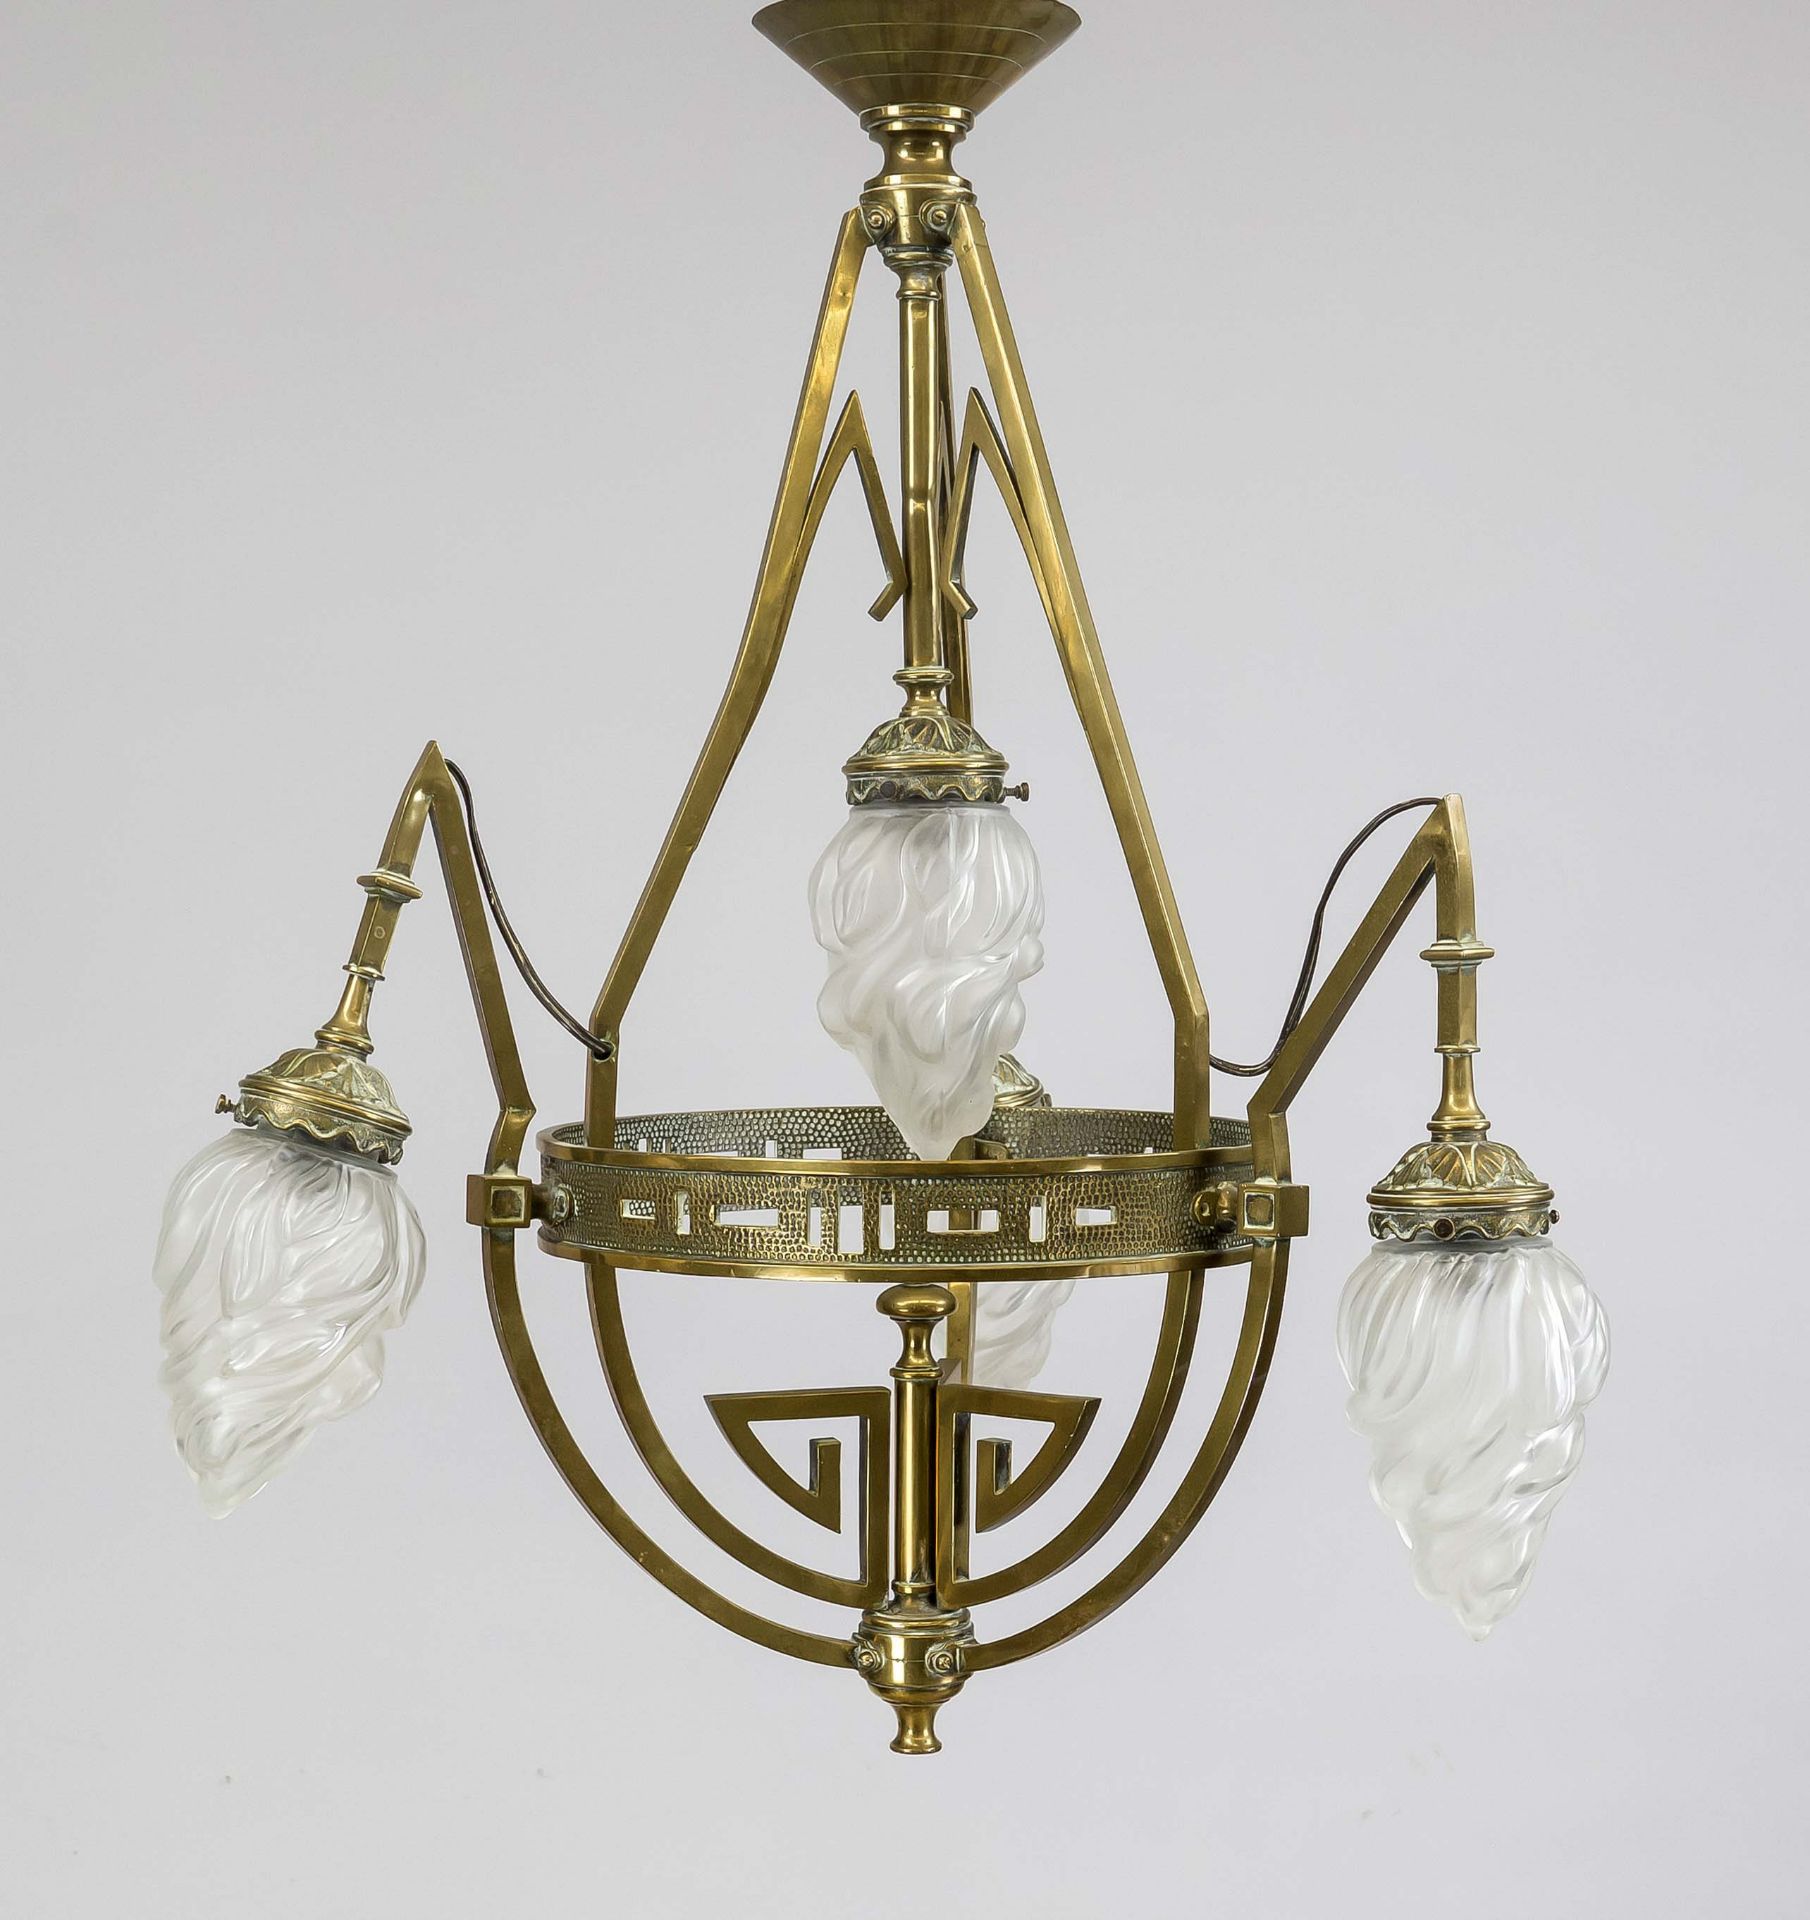 Ceiling lamp, late 19th century, three-pass brass frame with pointed volutes and openwork wreath.